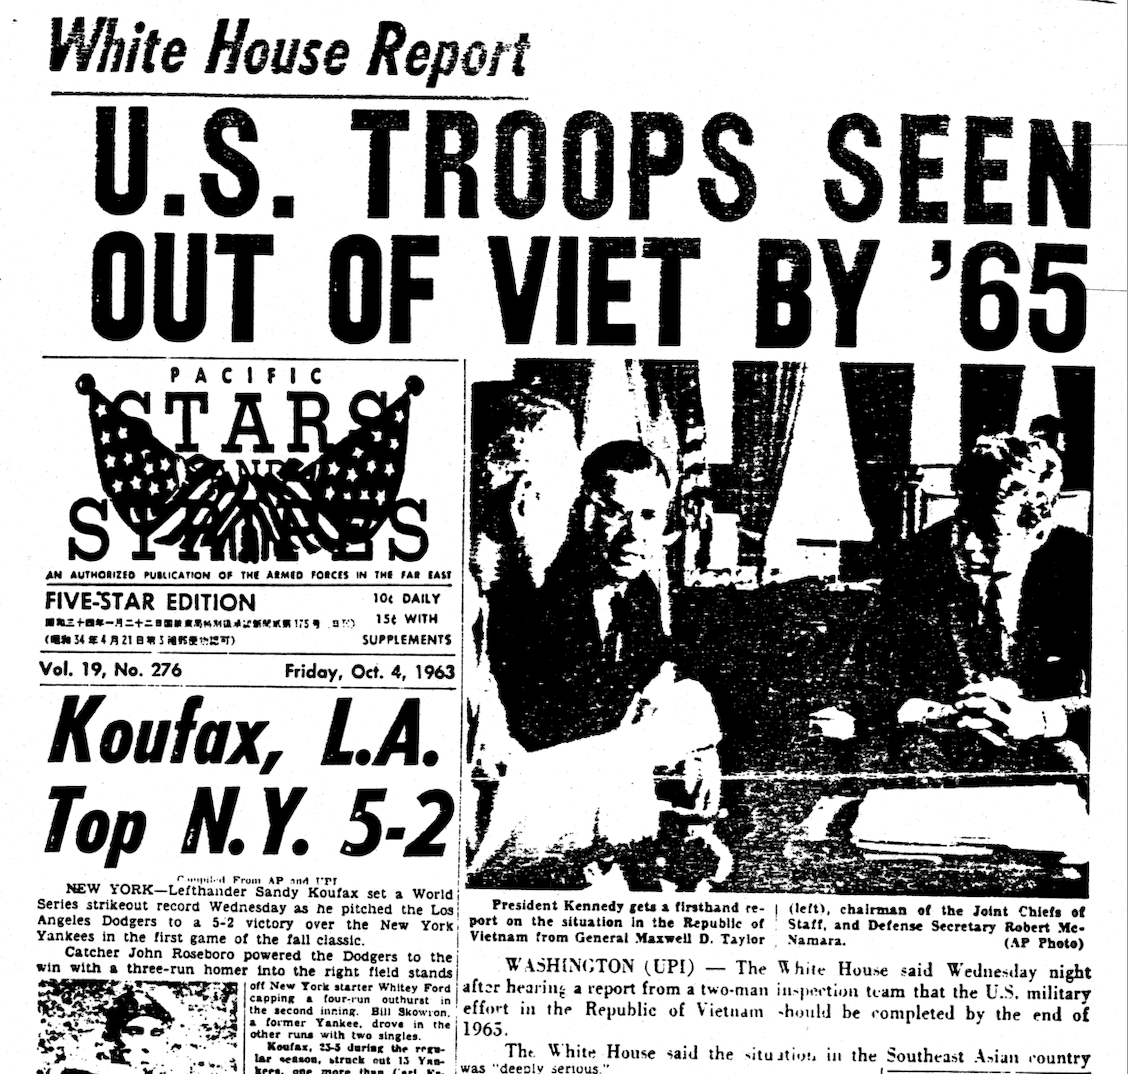 4 Stars and Stripes Oct 1963